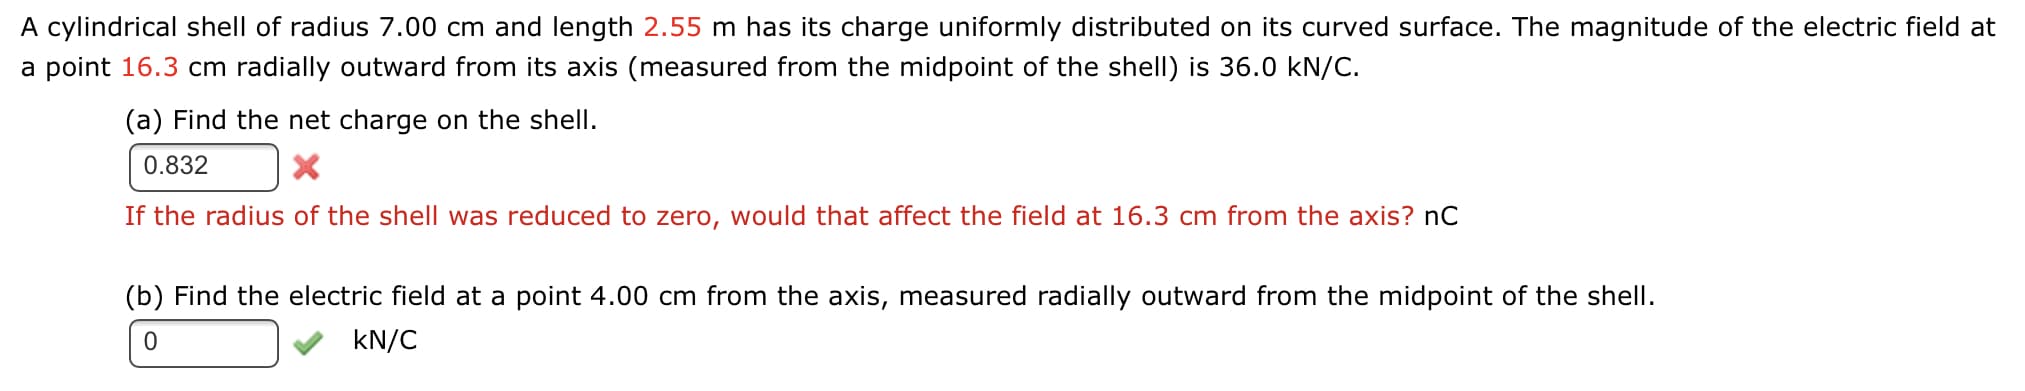 A cylindrical shell of radius 7.00 cm and length 2.55 m has its charge uniformly distributed on its curved surface. The magnitude of the electric field at
a point 16.3 cm radially outward from its axis (measured from the midpoint of the shell) is 36.0 kN/C.
(a) Find the net charge on the shell.
0.832
If the radius of the shell was reduced to zero, would that affect the field at 16.3 cm from the axis? nC
(b) Find the electric field at a point 4.00 cm from the axis, measured radially outward from the midpoint of the shell.
kN/C
